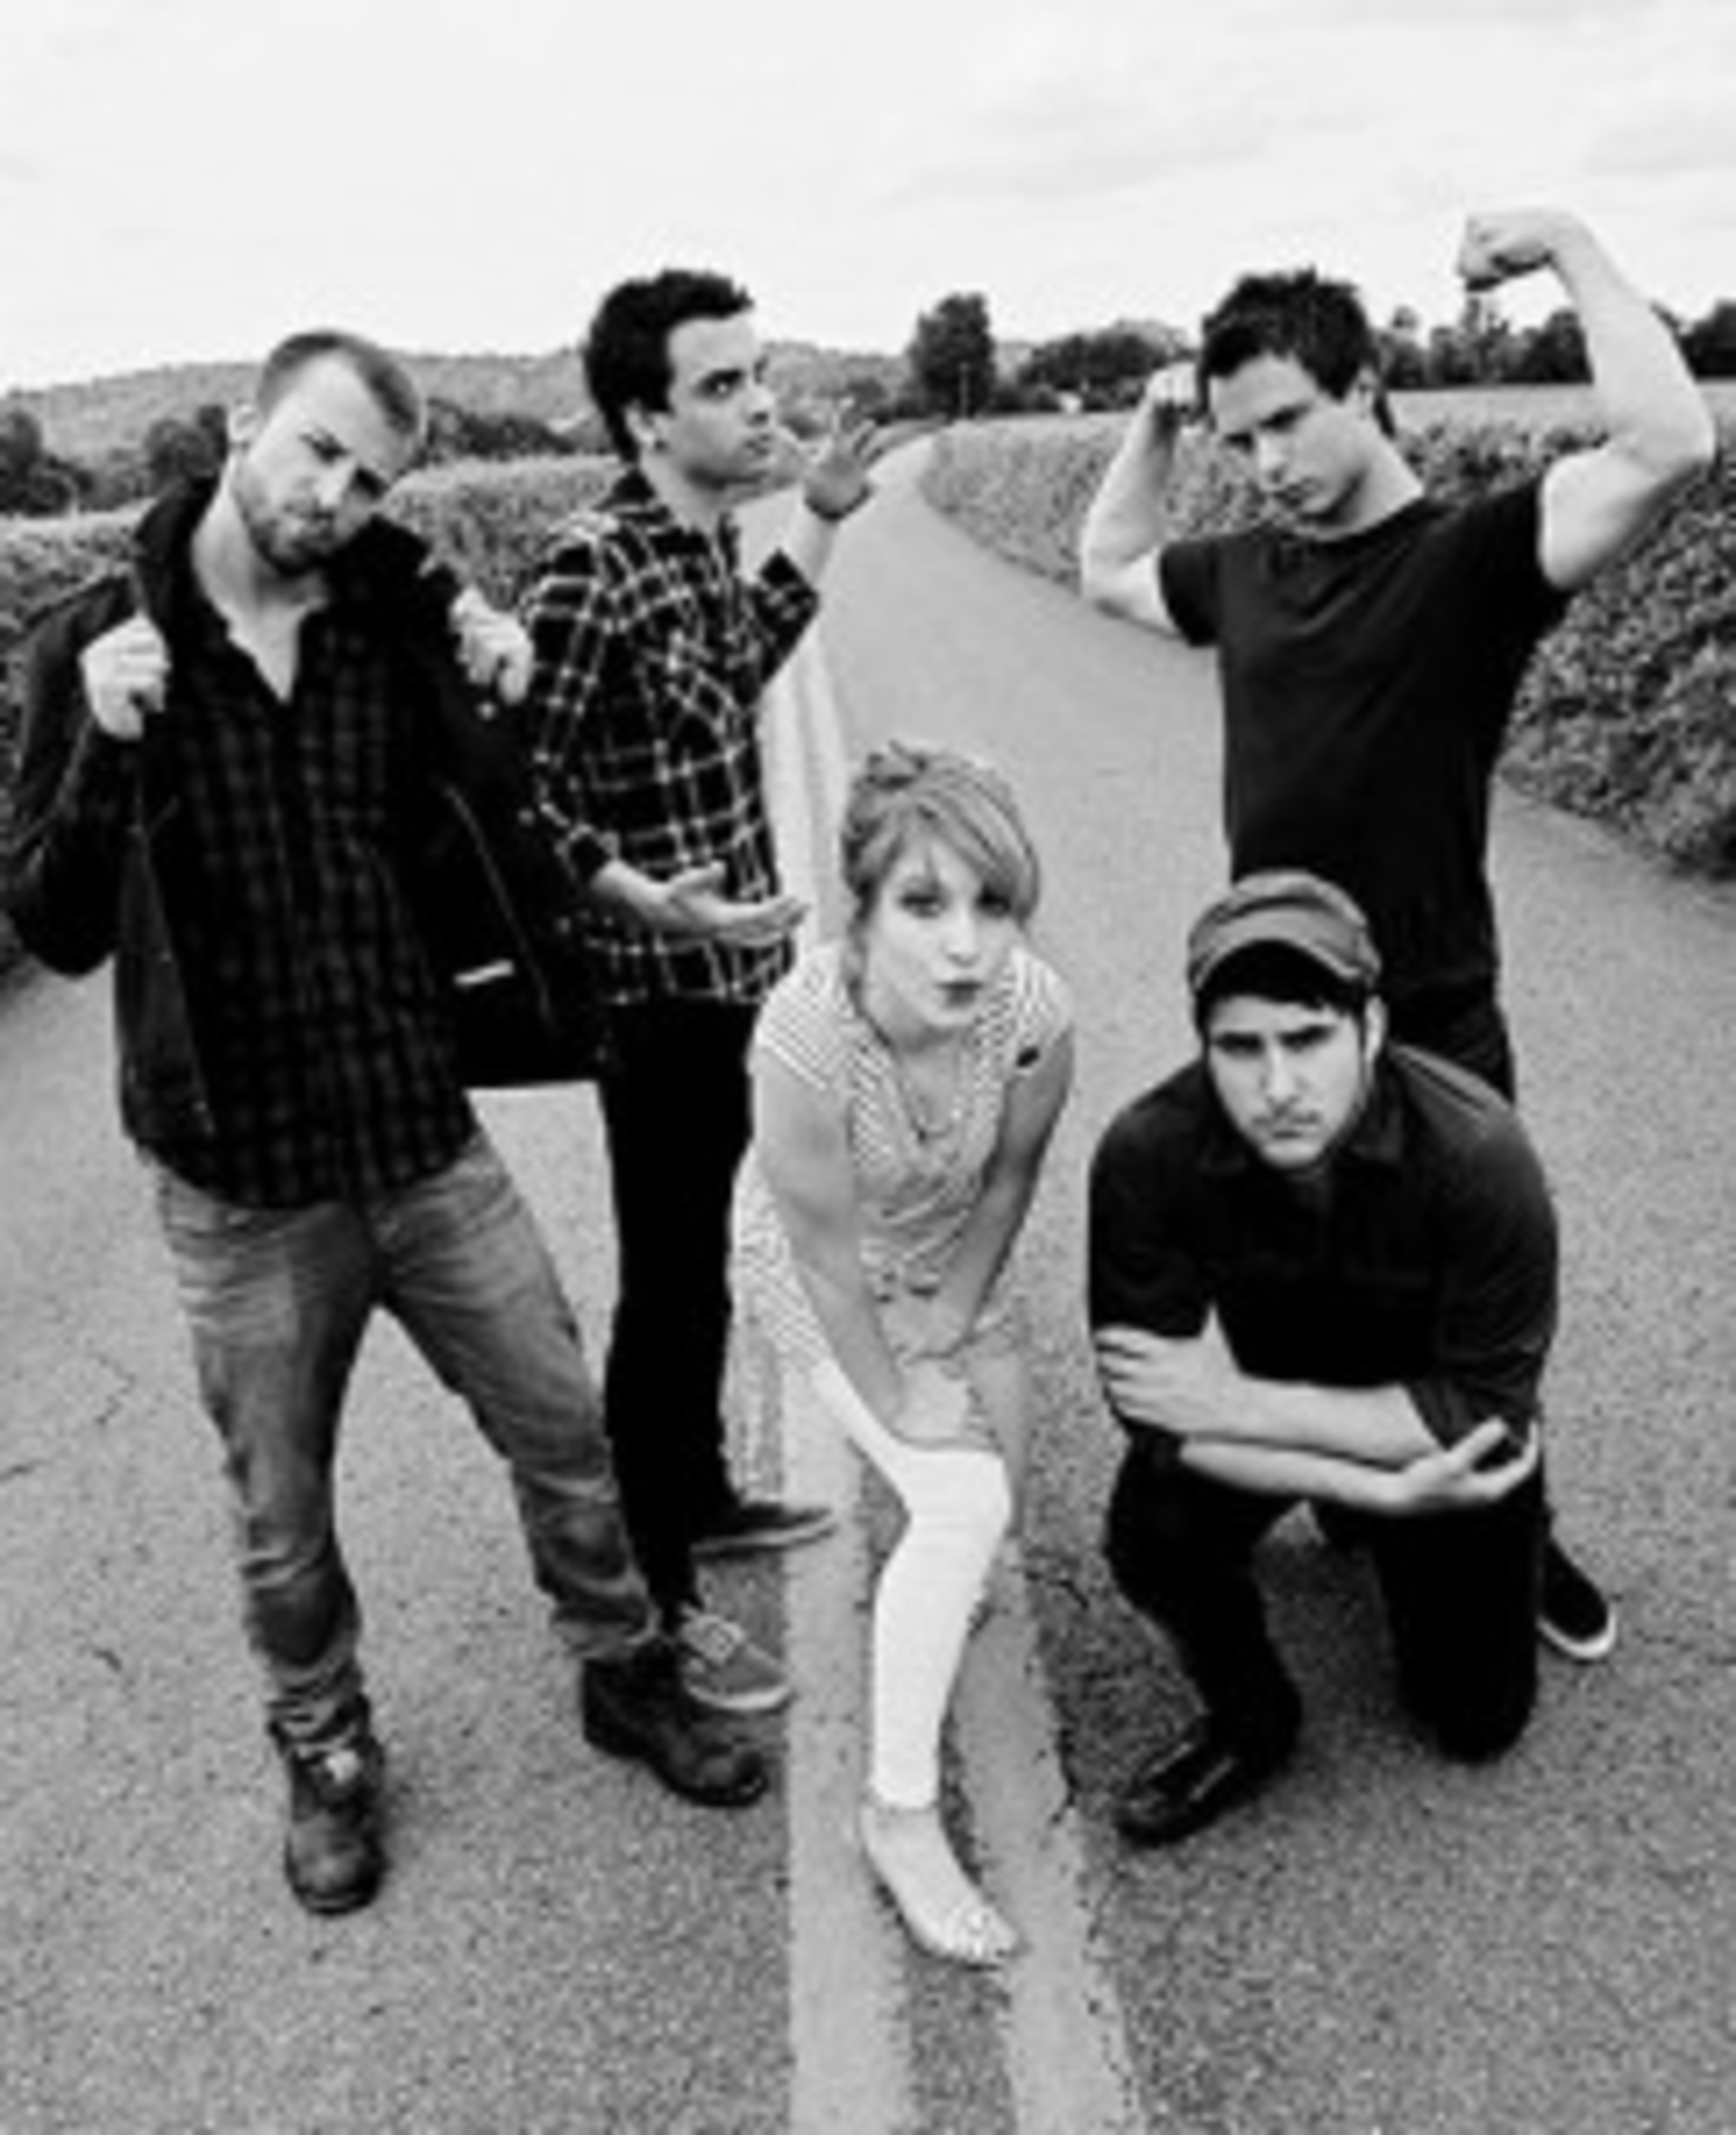 New music: Paramore, Brand New Eyes out today, Tampa